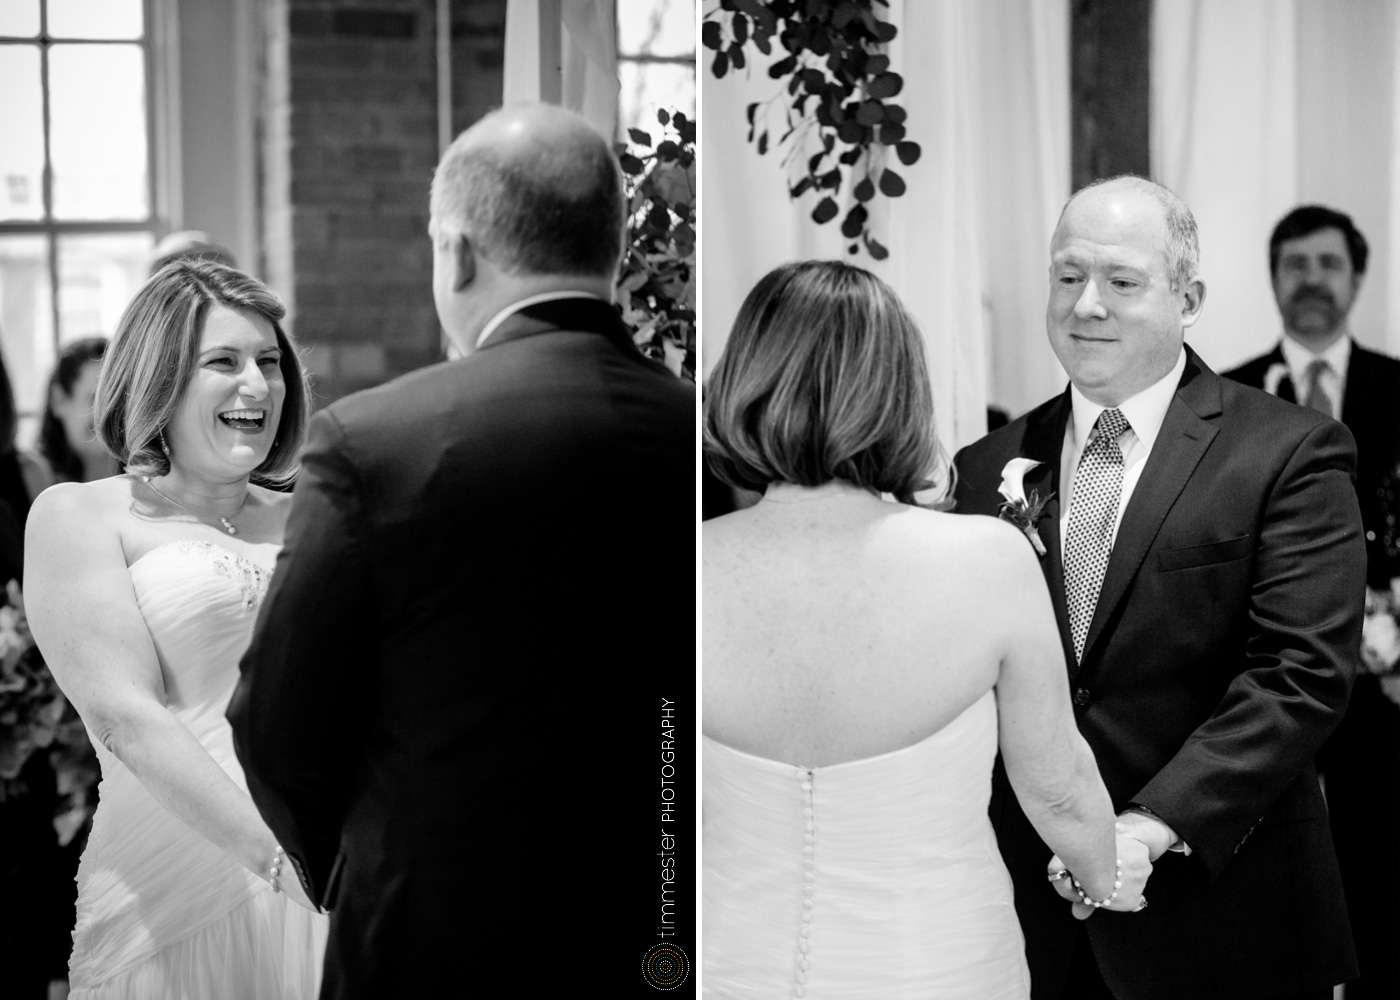 Jessica + David were married in Durham, NC at The Cotton Room.